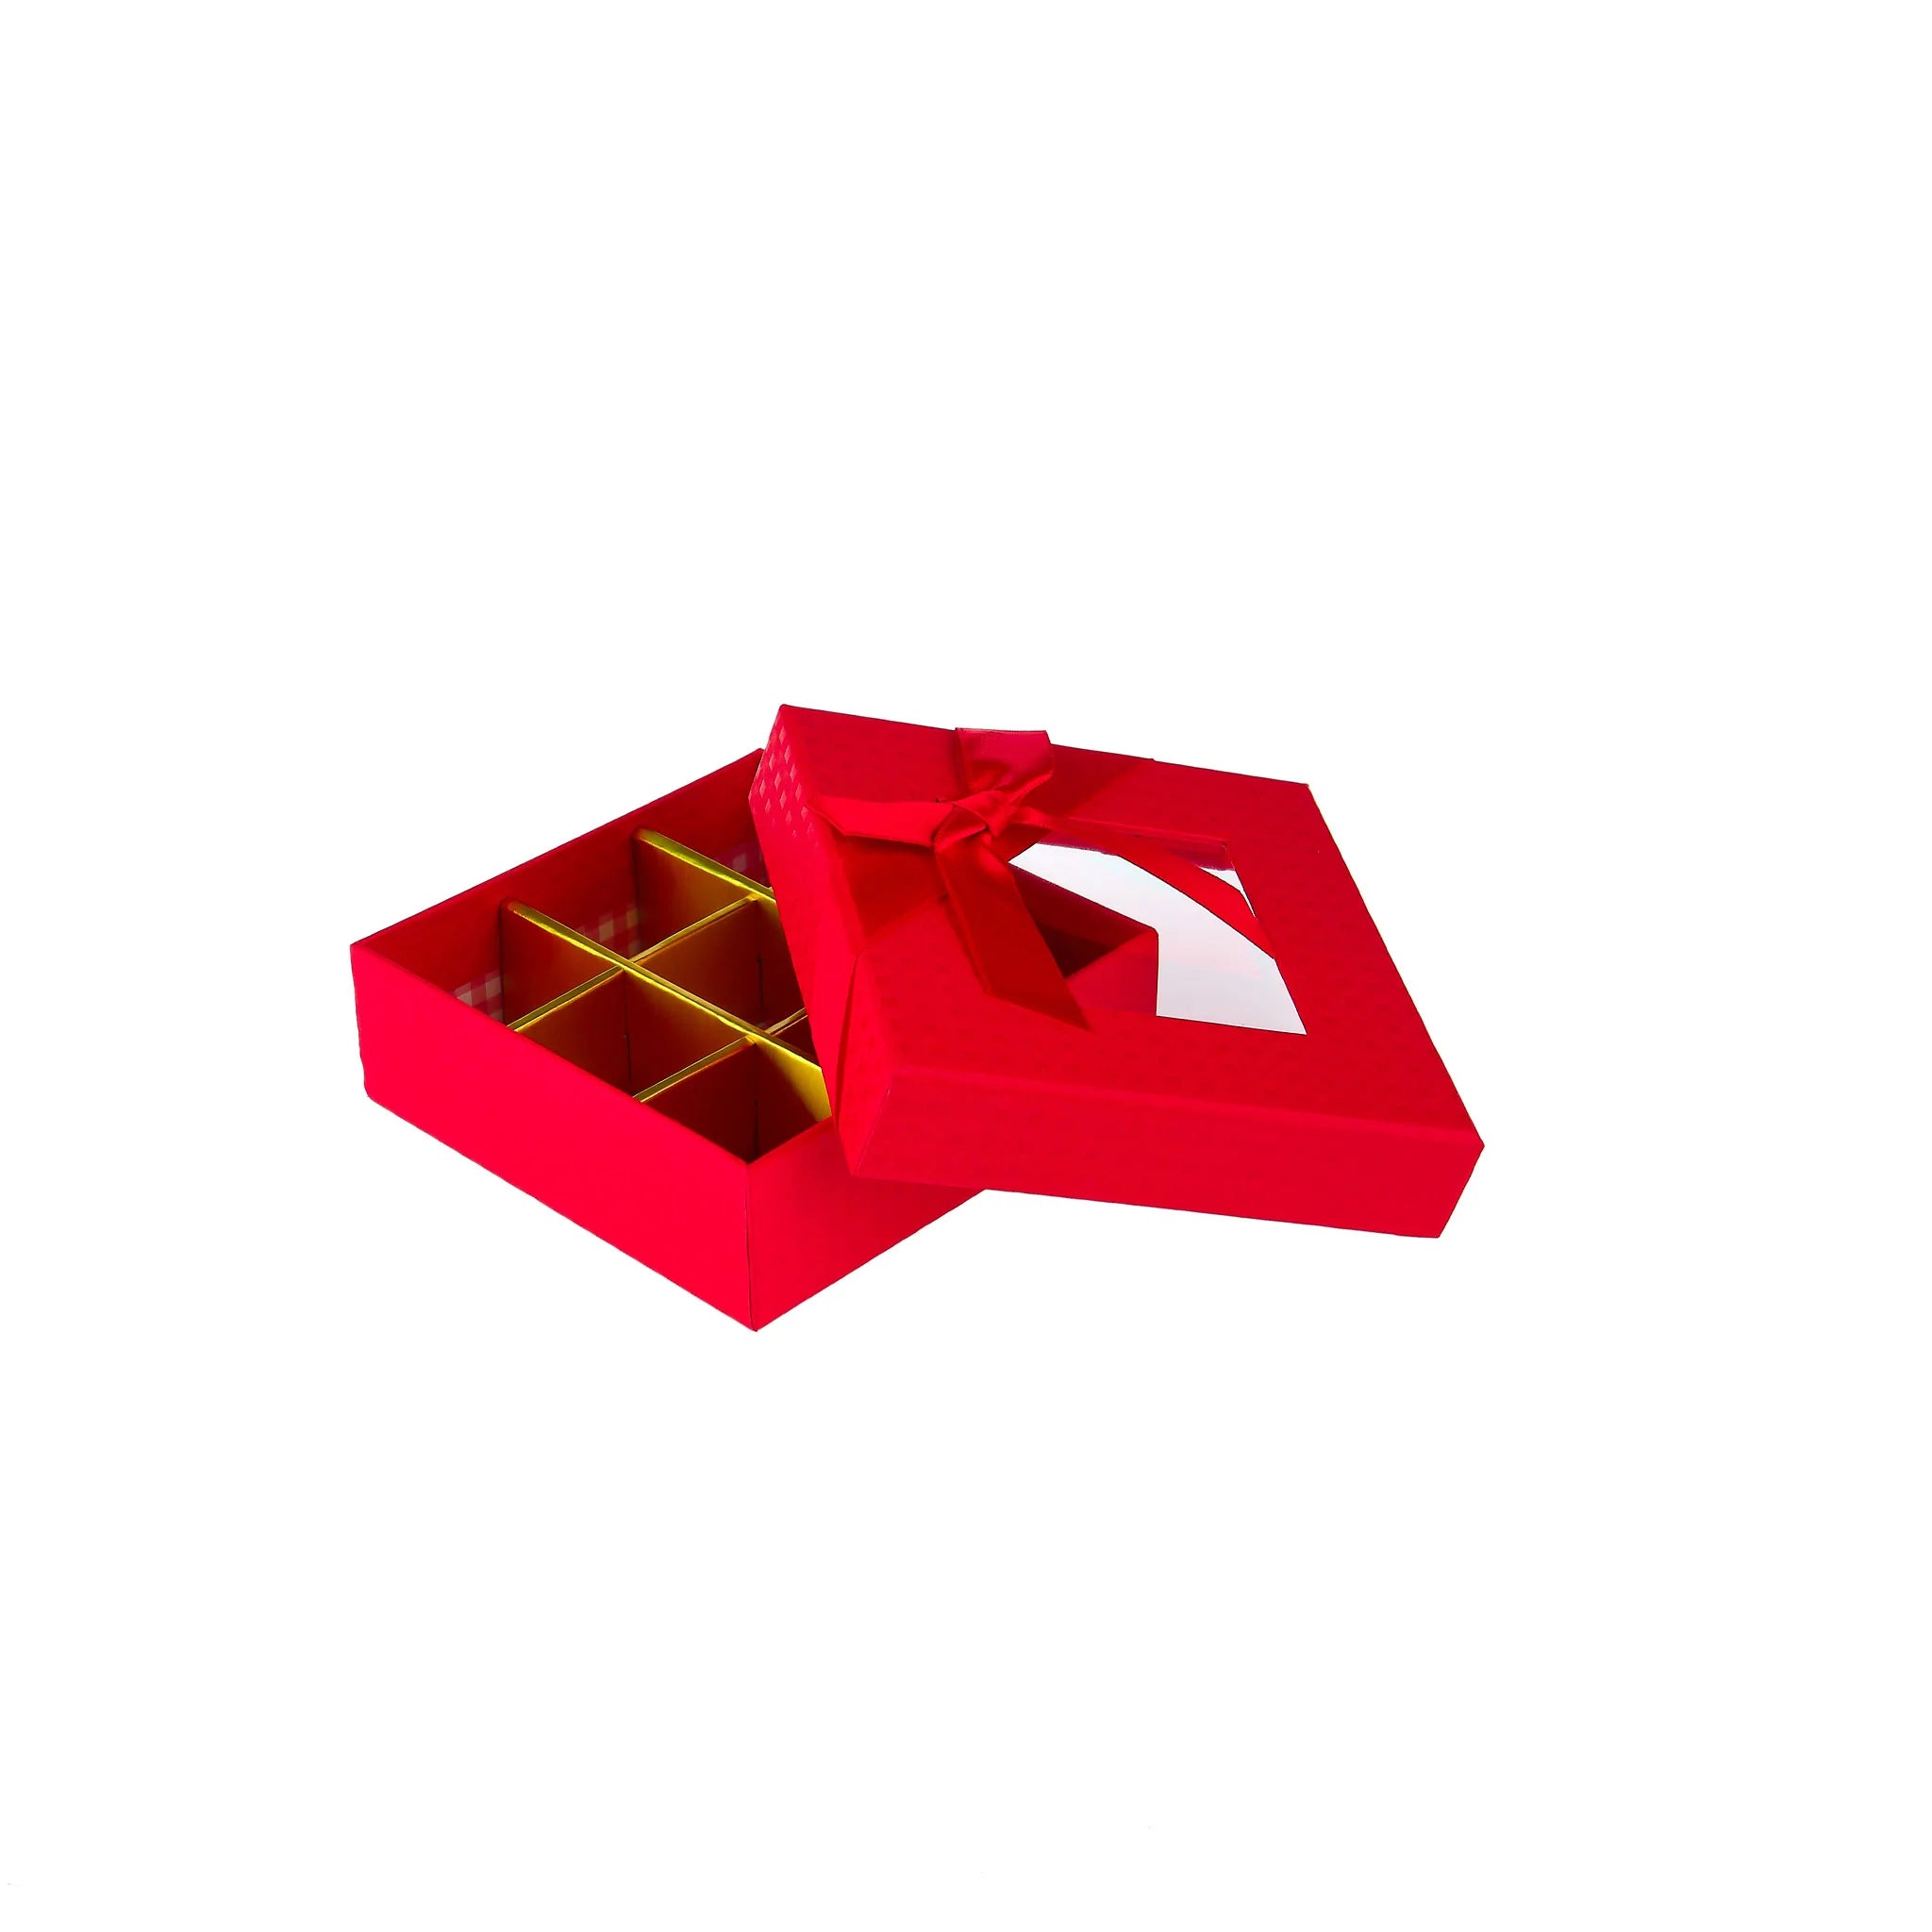 48 Pieces Square Red Chocolate Gift Box Shape 09 Division - 12*12*4 cm